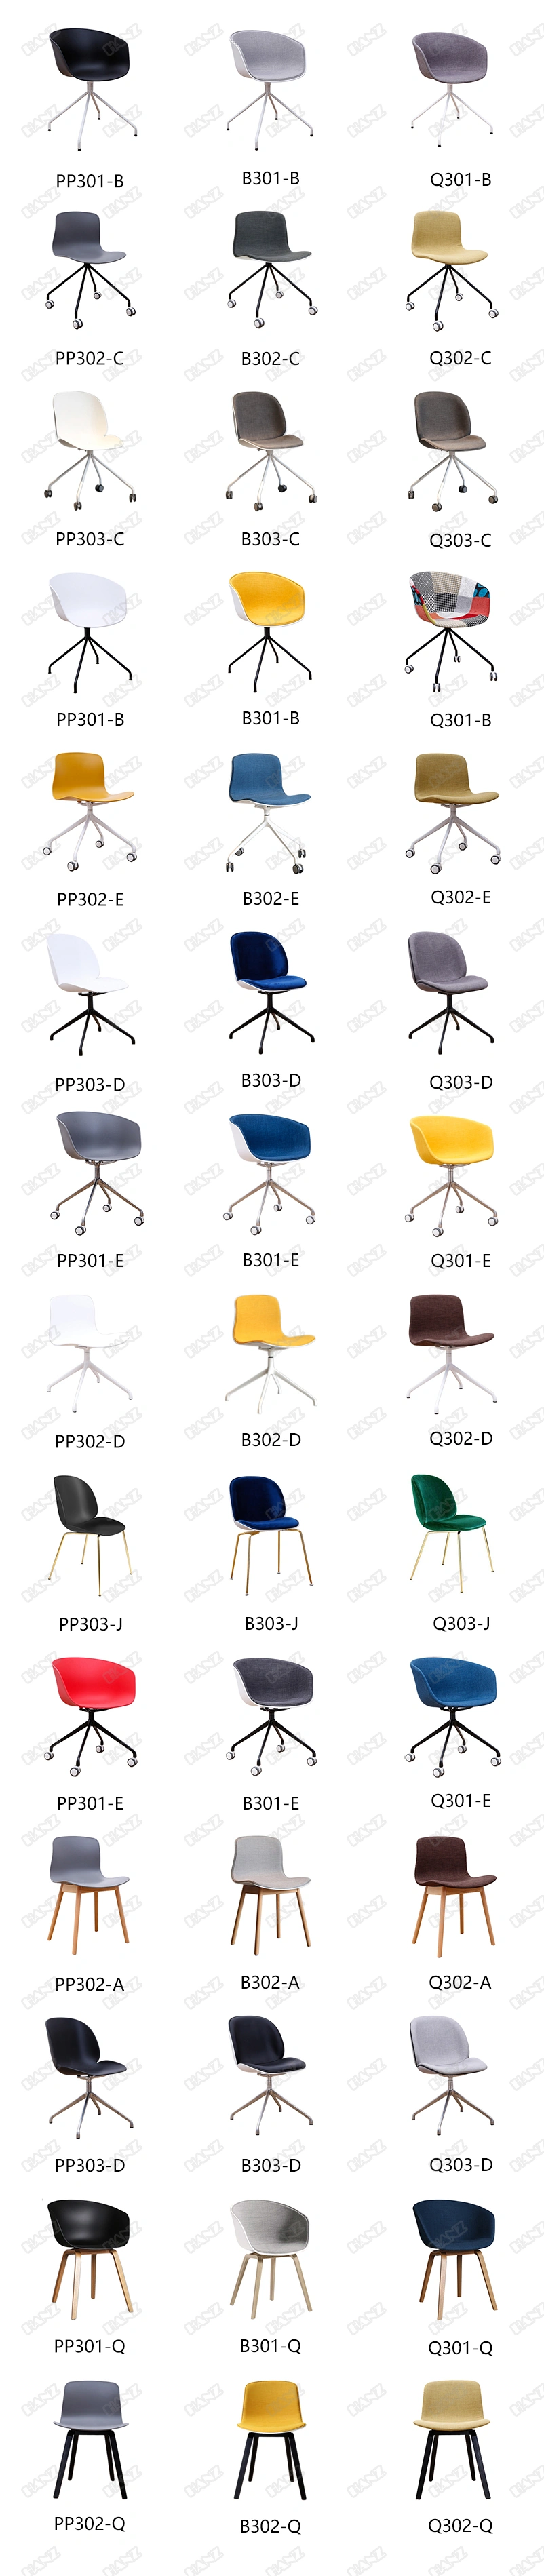 PP302 Standard High Quality Plastic Metal Leg Without Arm Office Chair